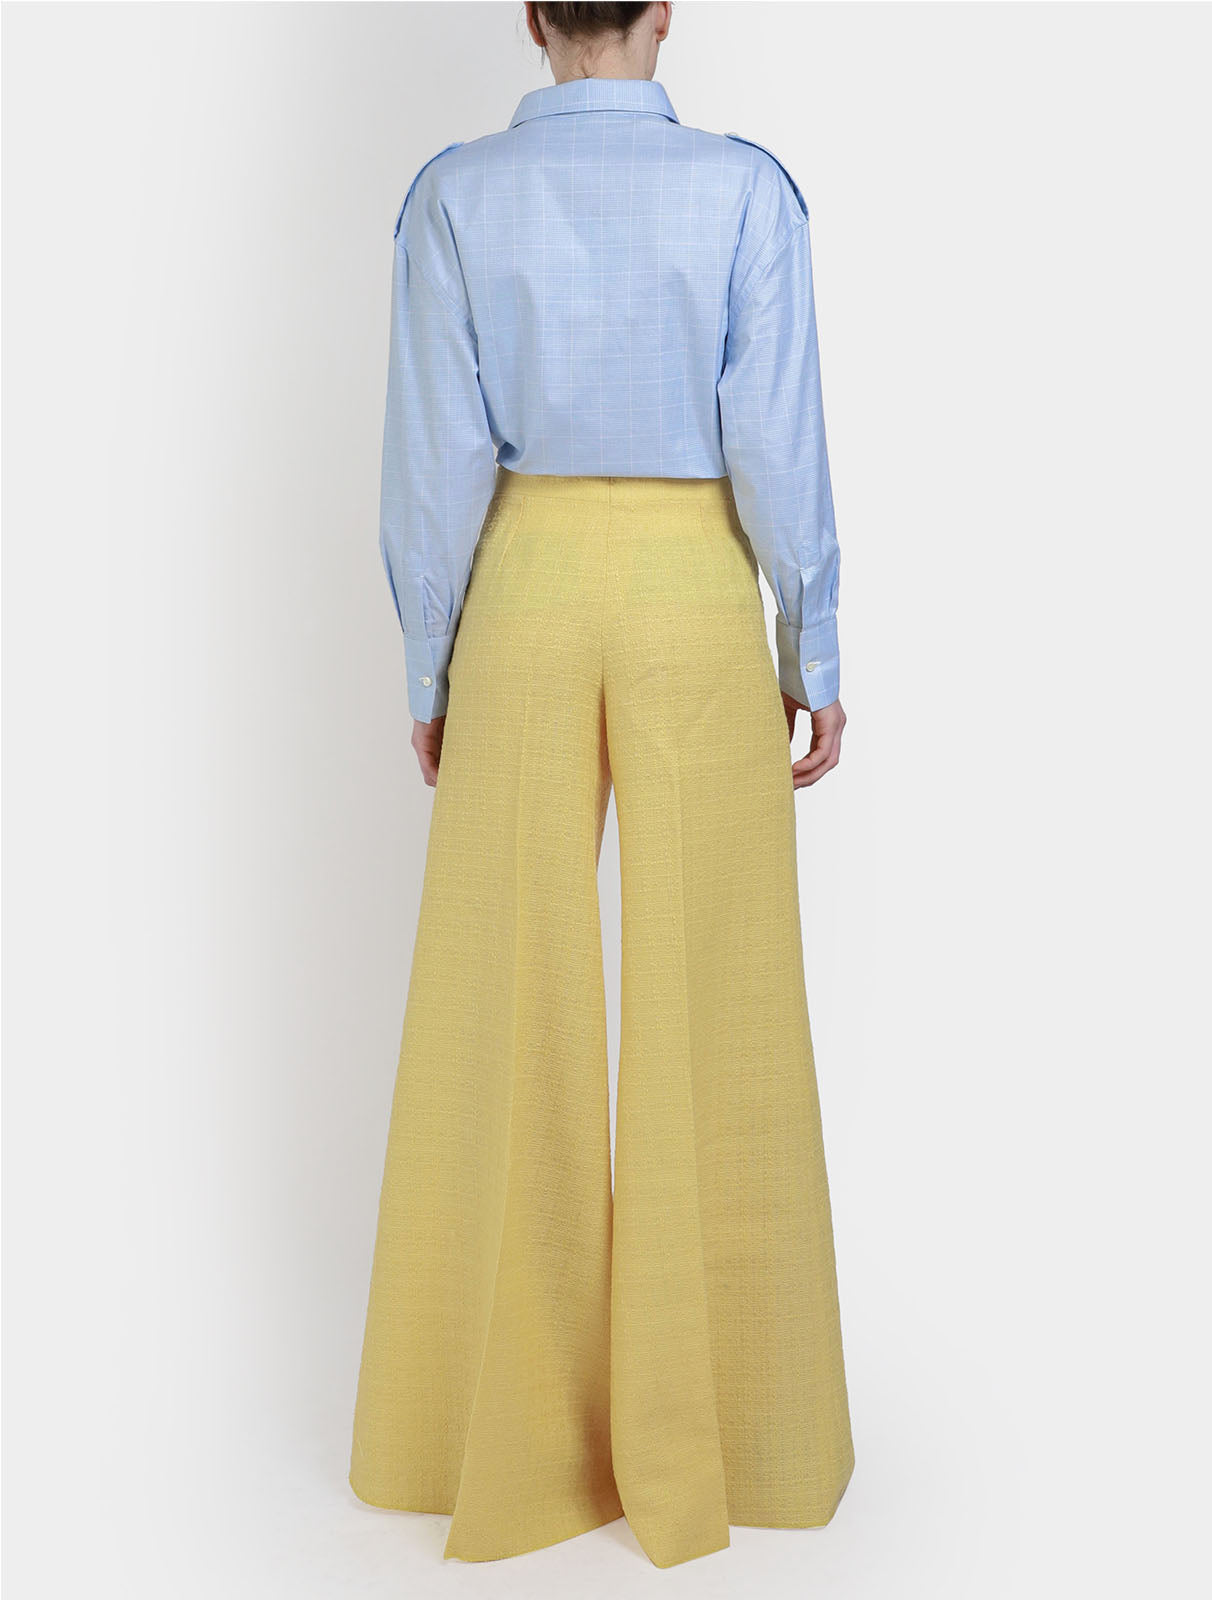 The Paola Trousers